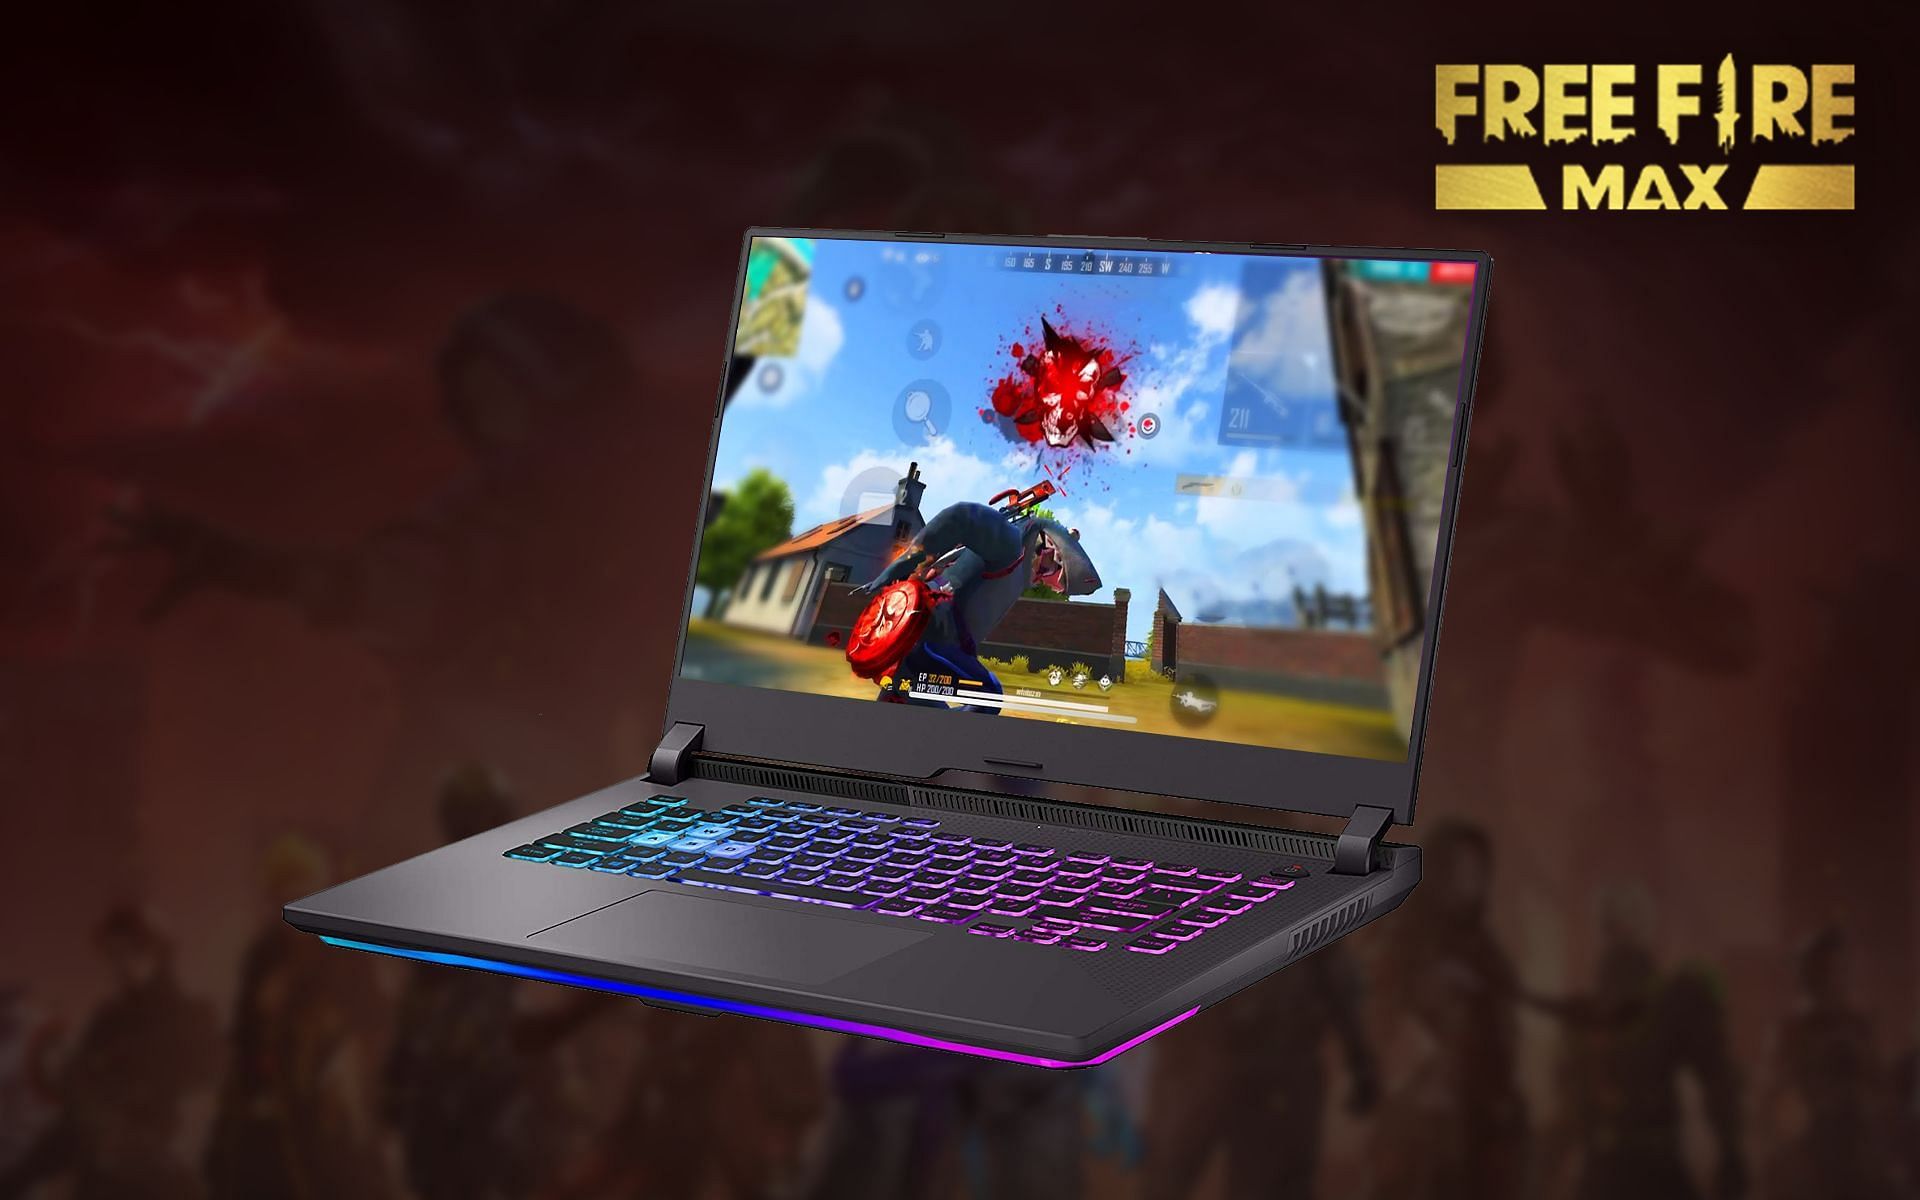 How to play Free Fire MAX on laptop using emulator